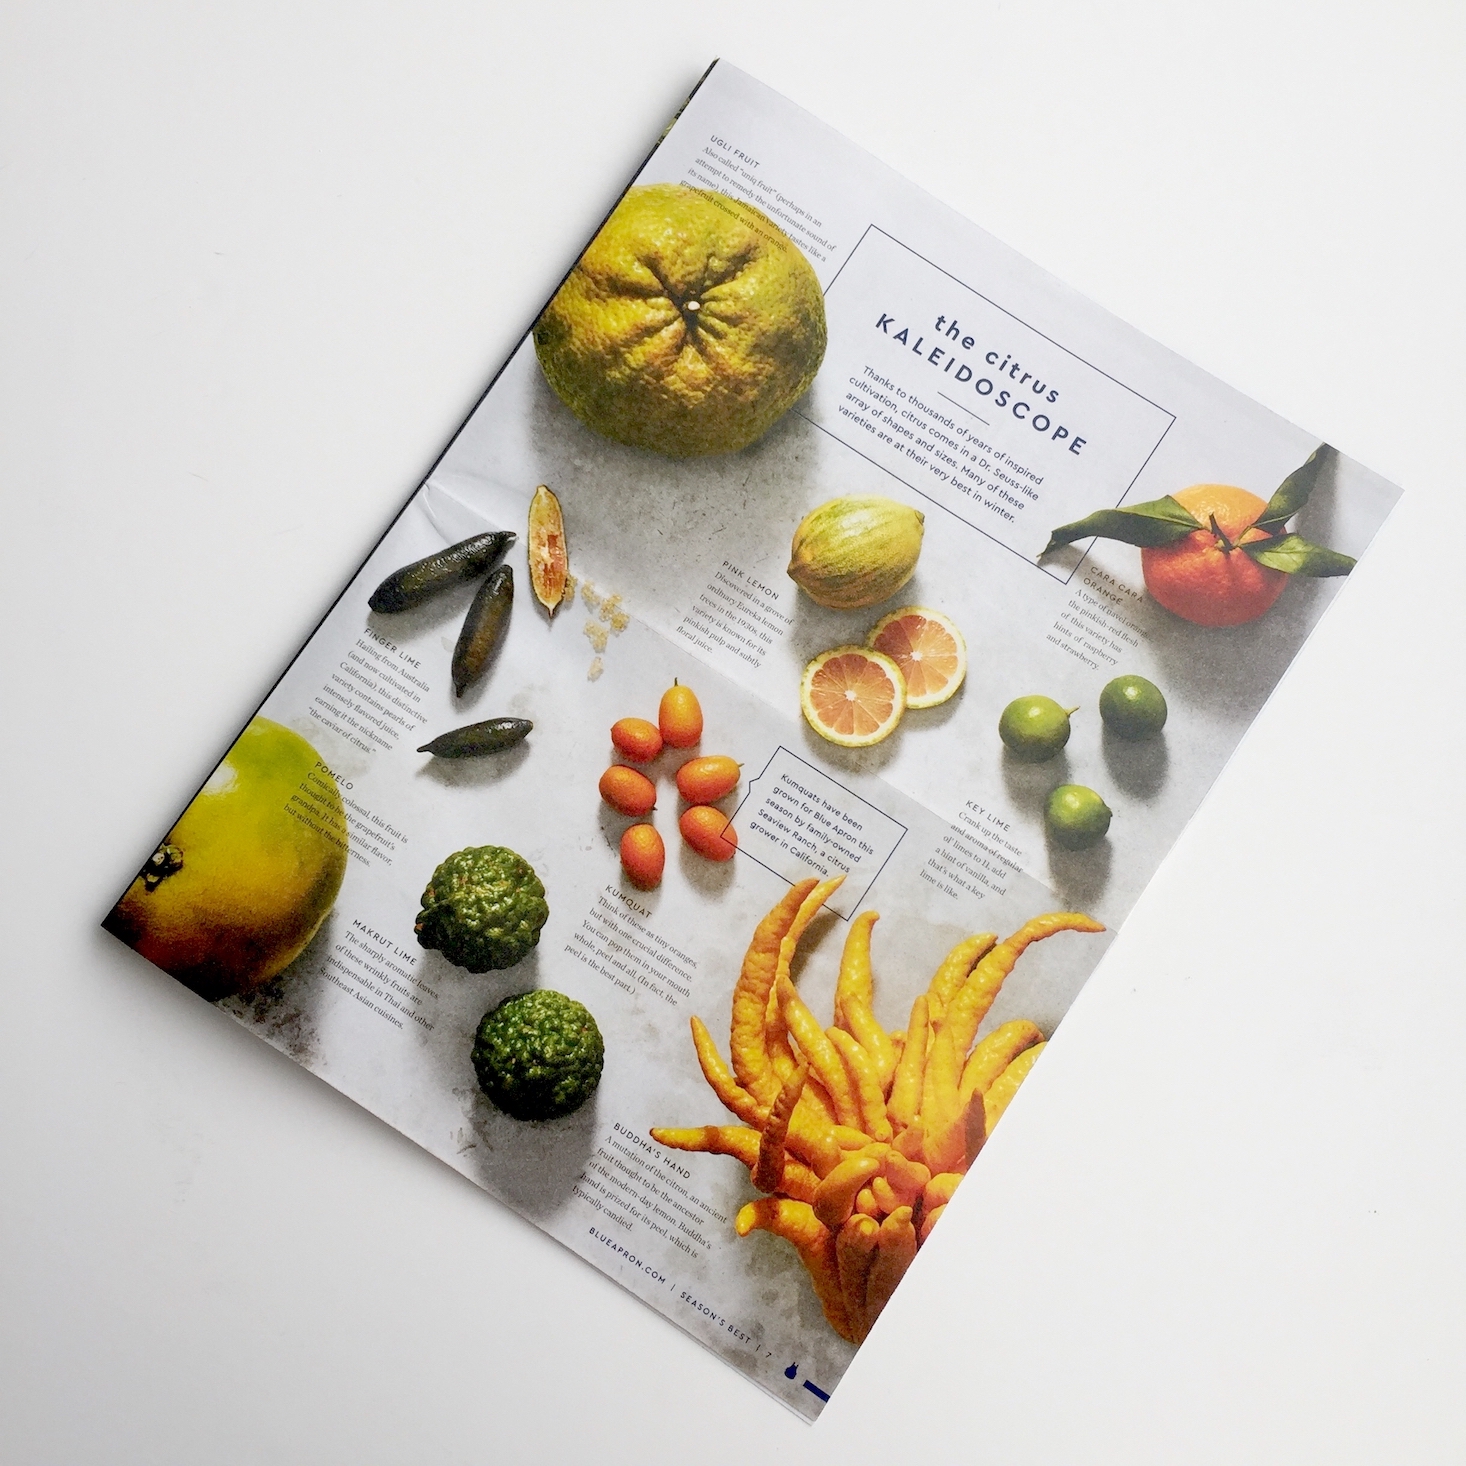 Blue-apron-january-2017-booklet-open